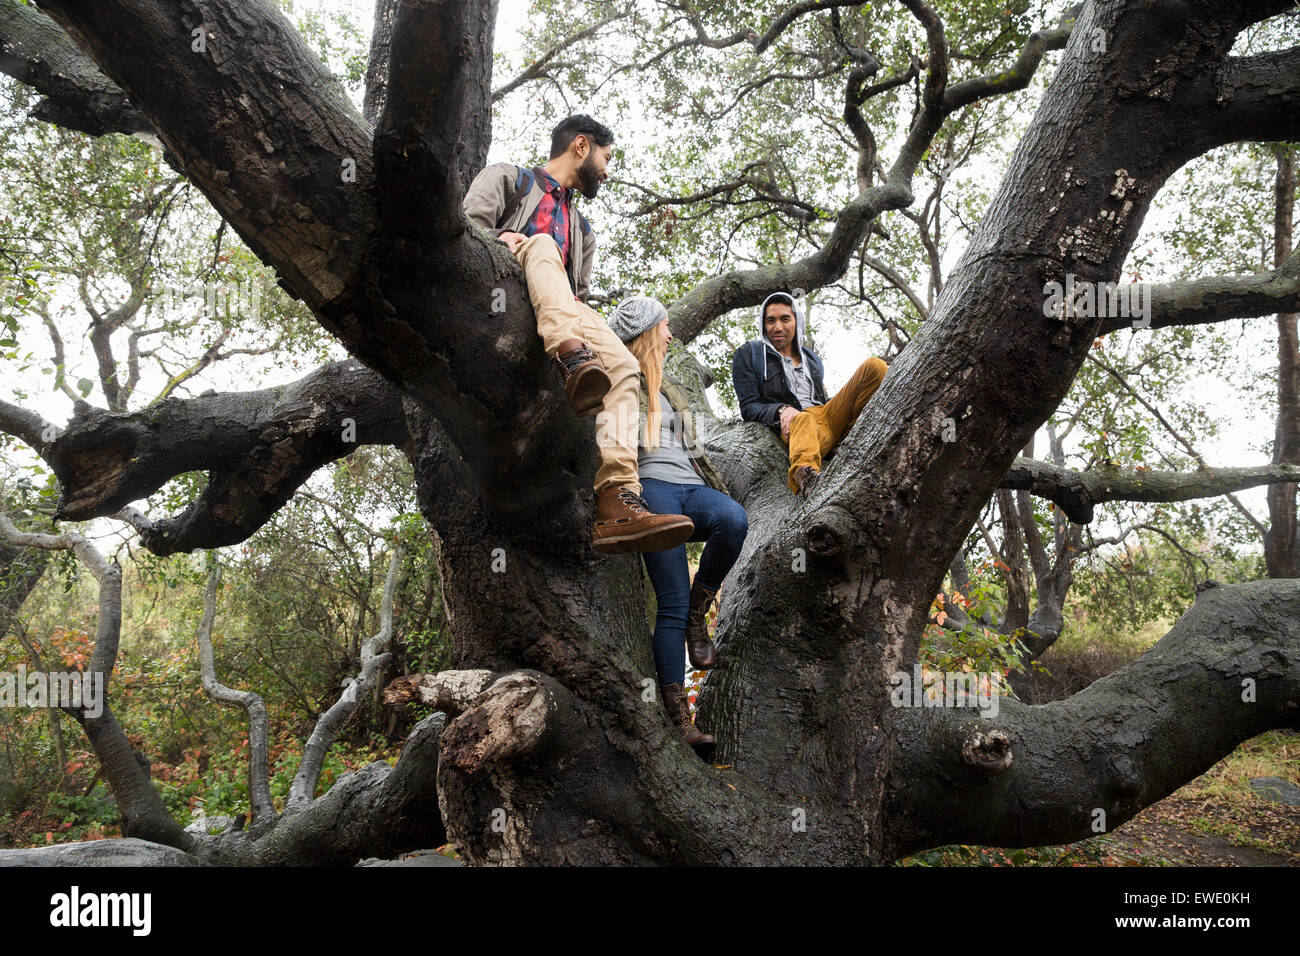 Smiling young woman and two young men sitting in a tree Stock Photo